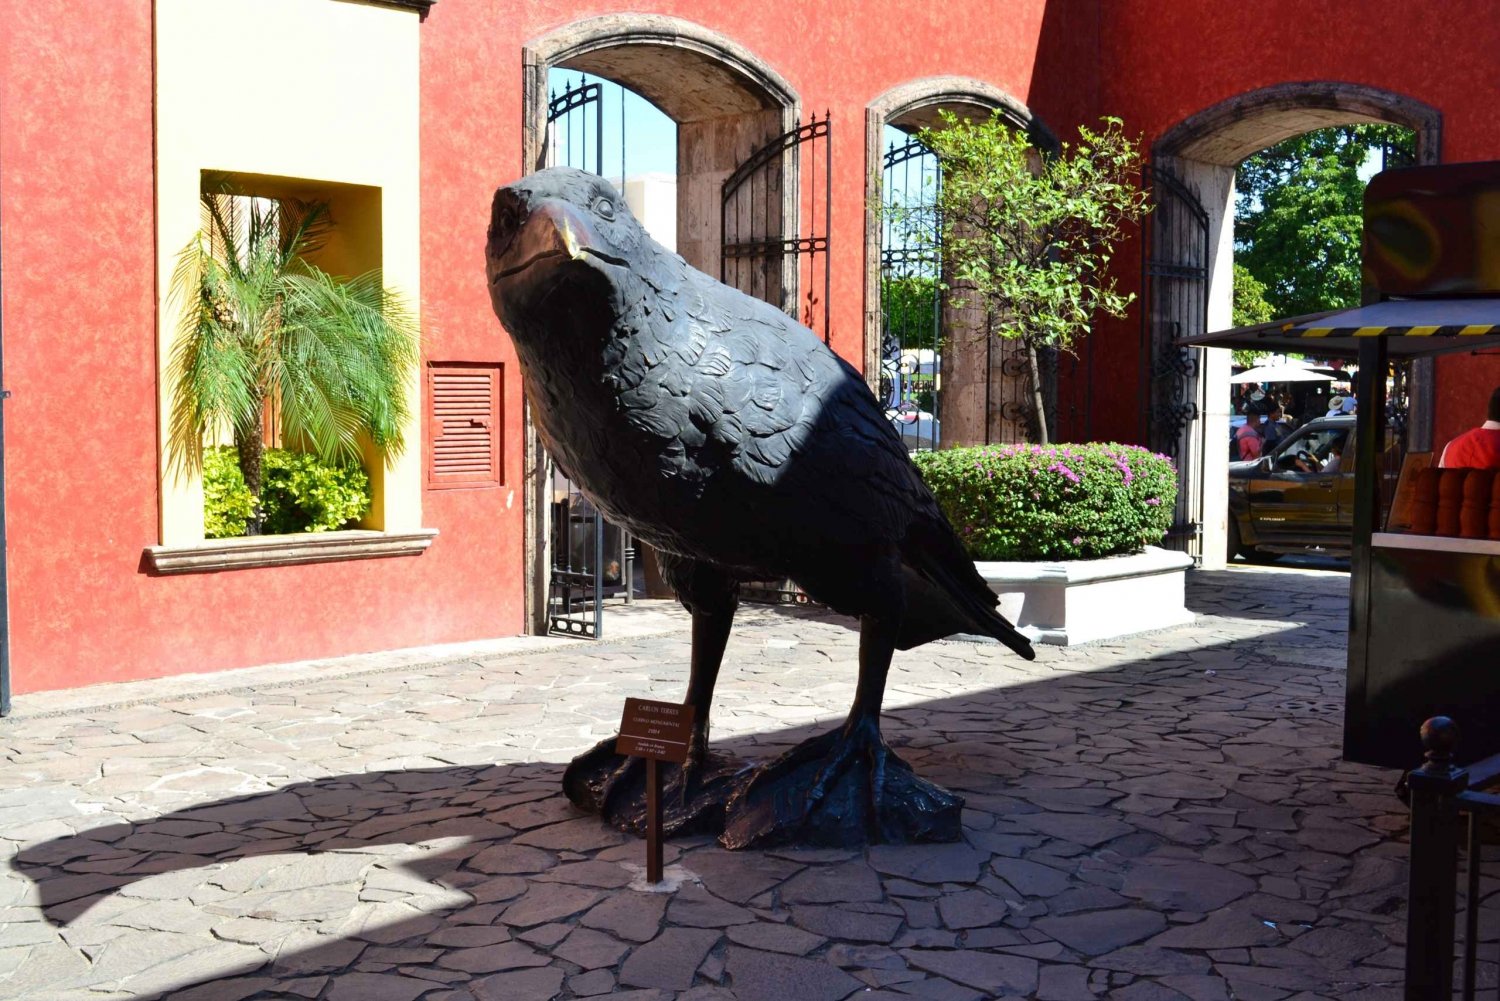 From Guadalajara: Town of Tequila & Jose Cuervo Factory Tour